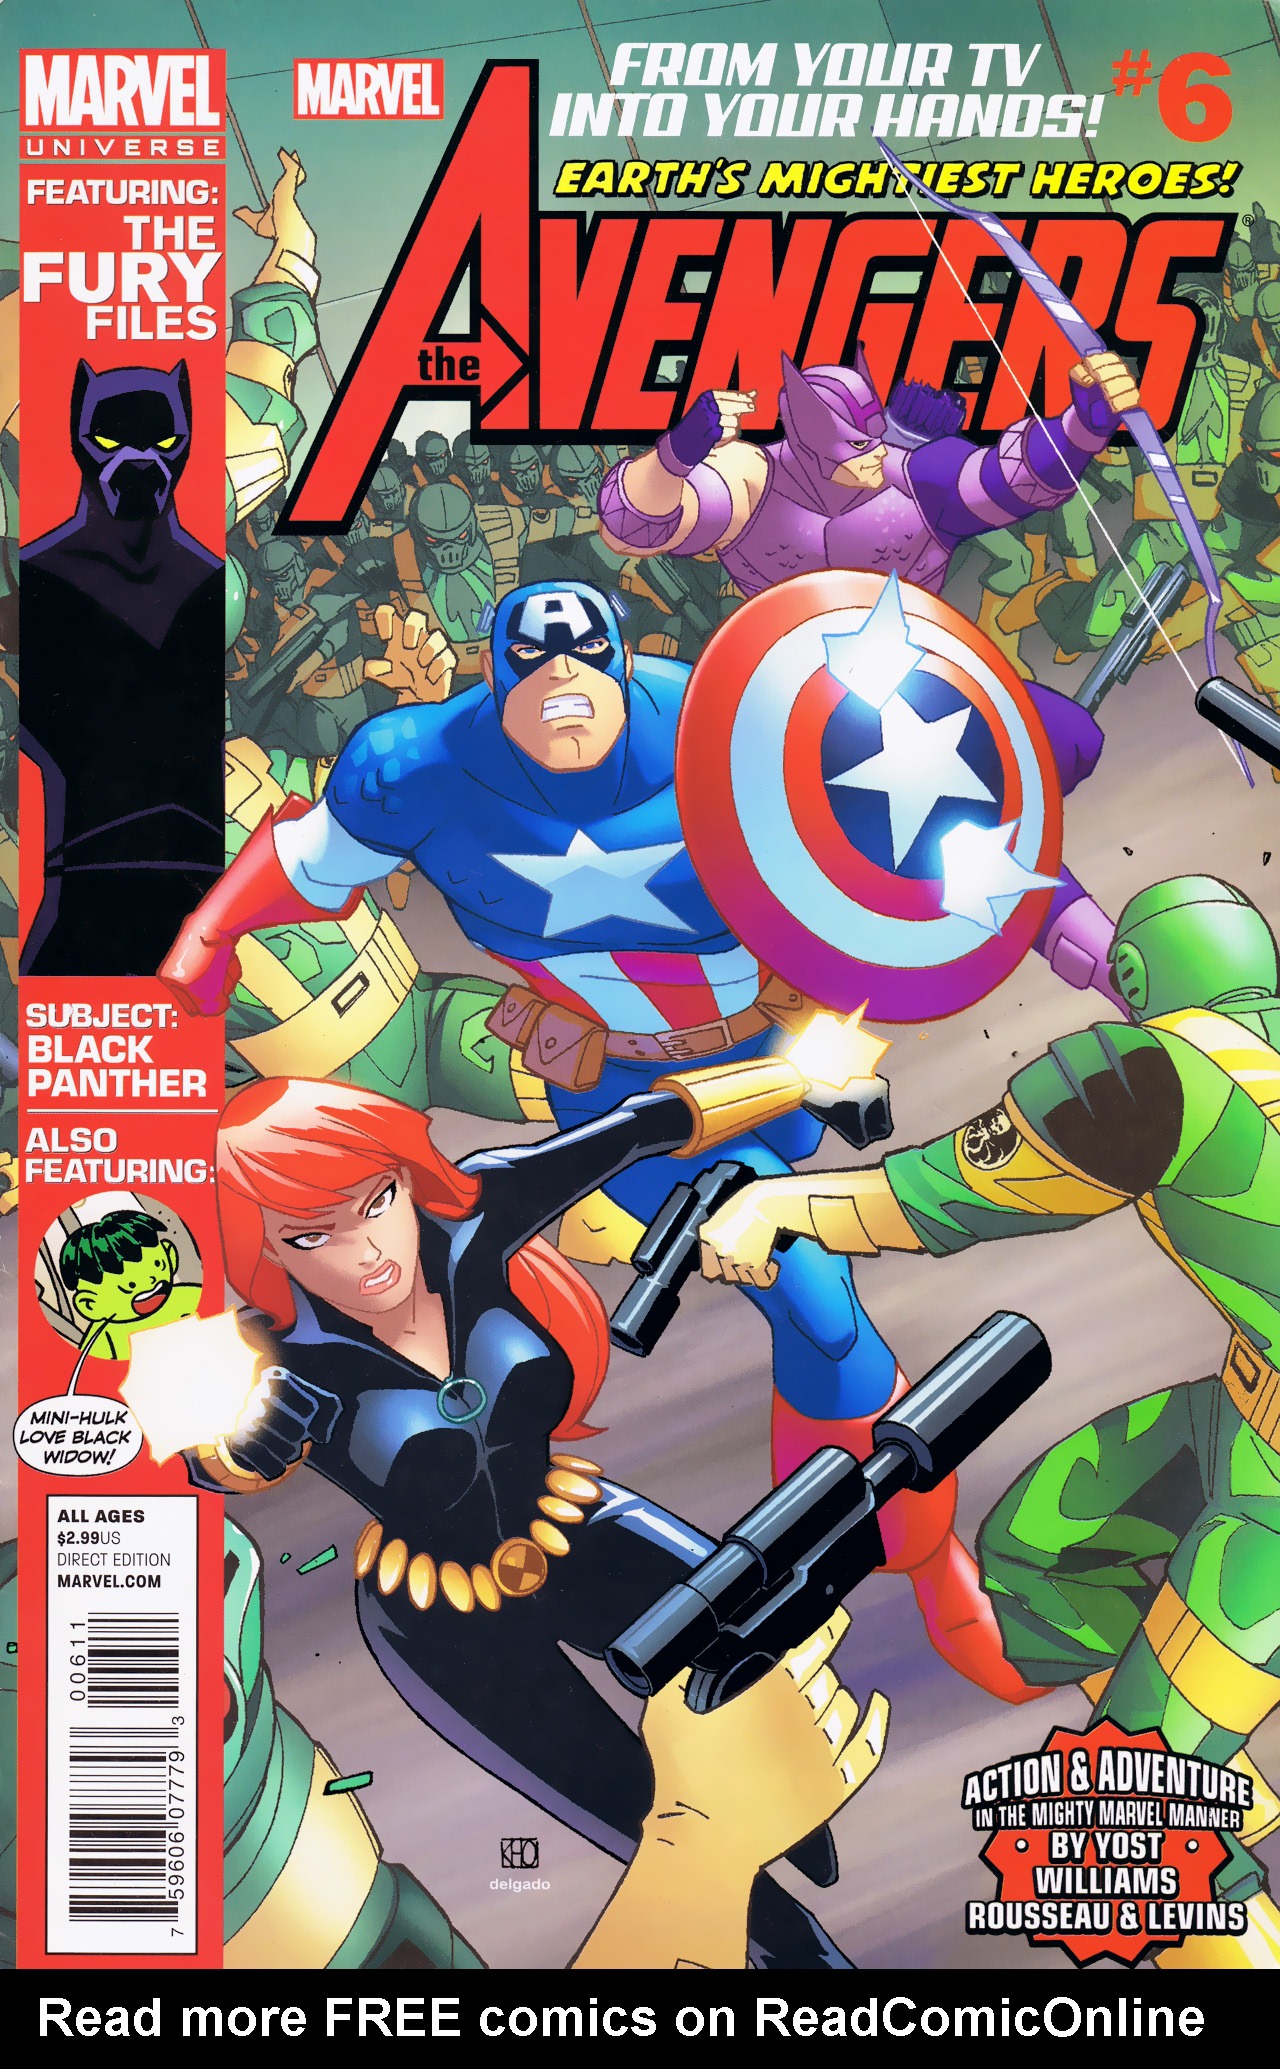 Read online Marvel Universe Avengers Earth's Mightiest Heroes comic -  Issue #6 - 2